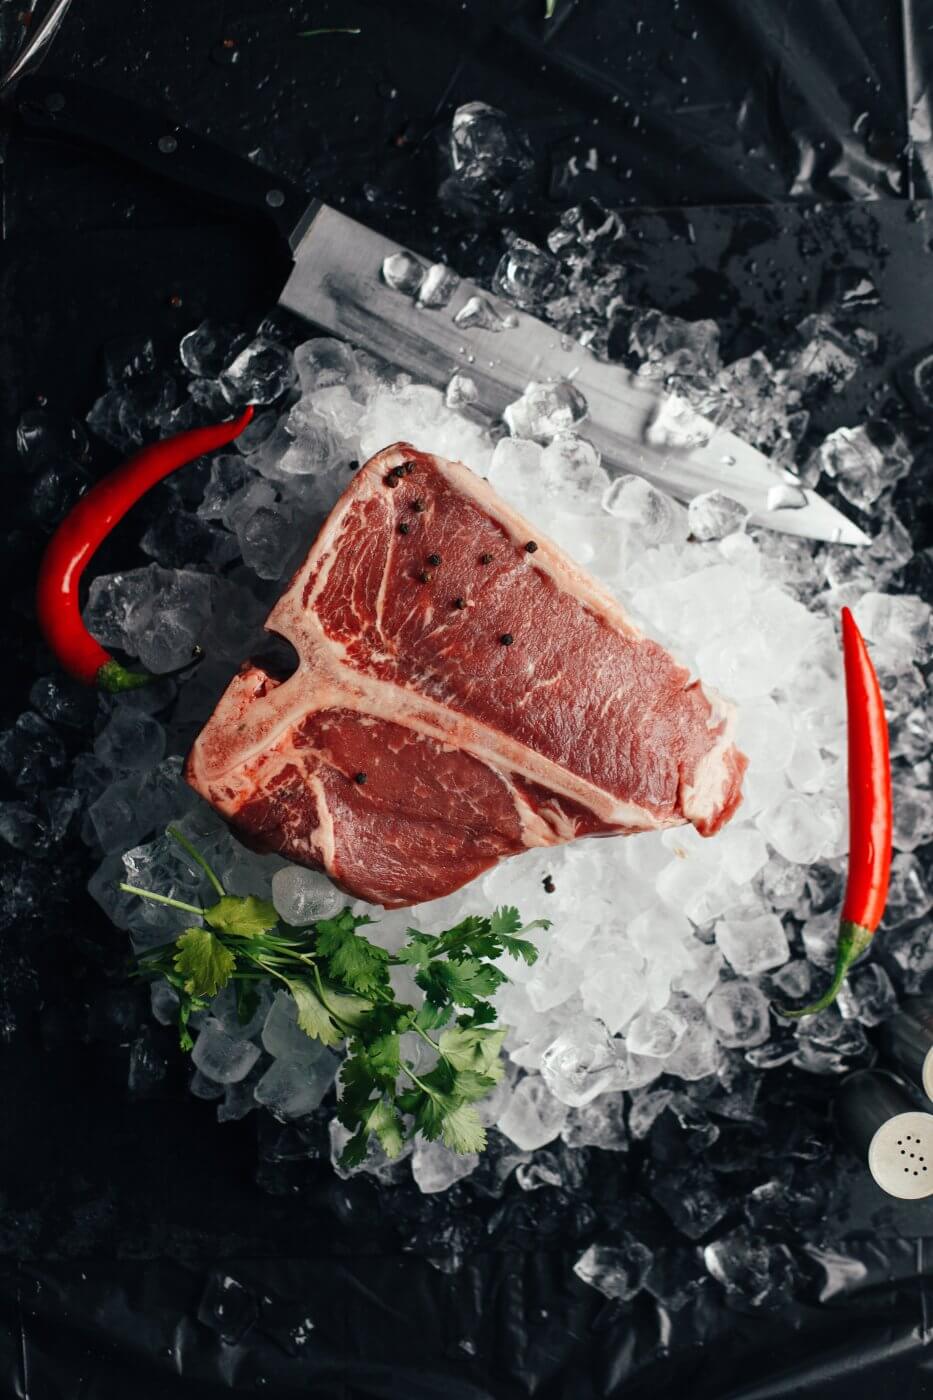 Steak on Ice | The Mustcard